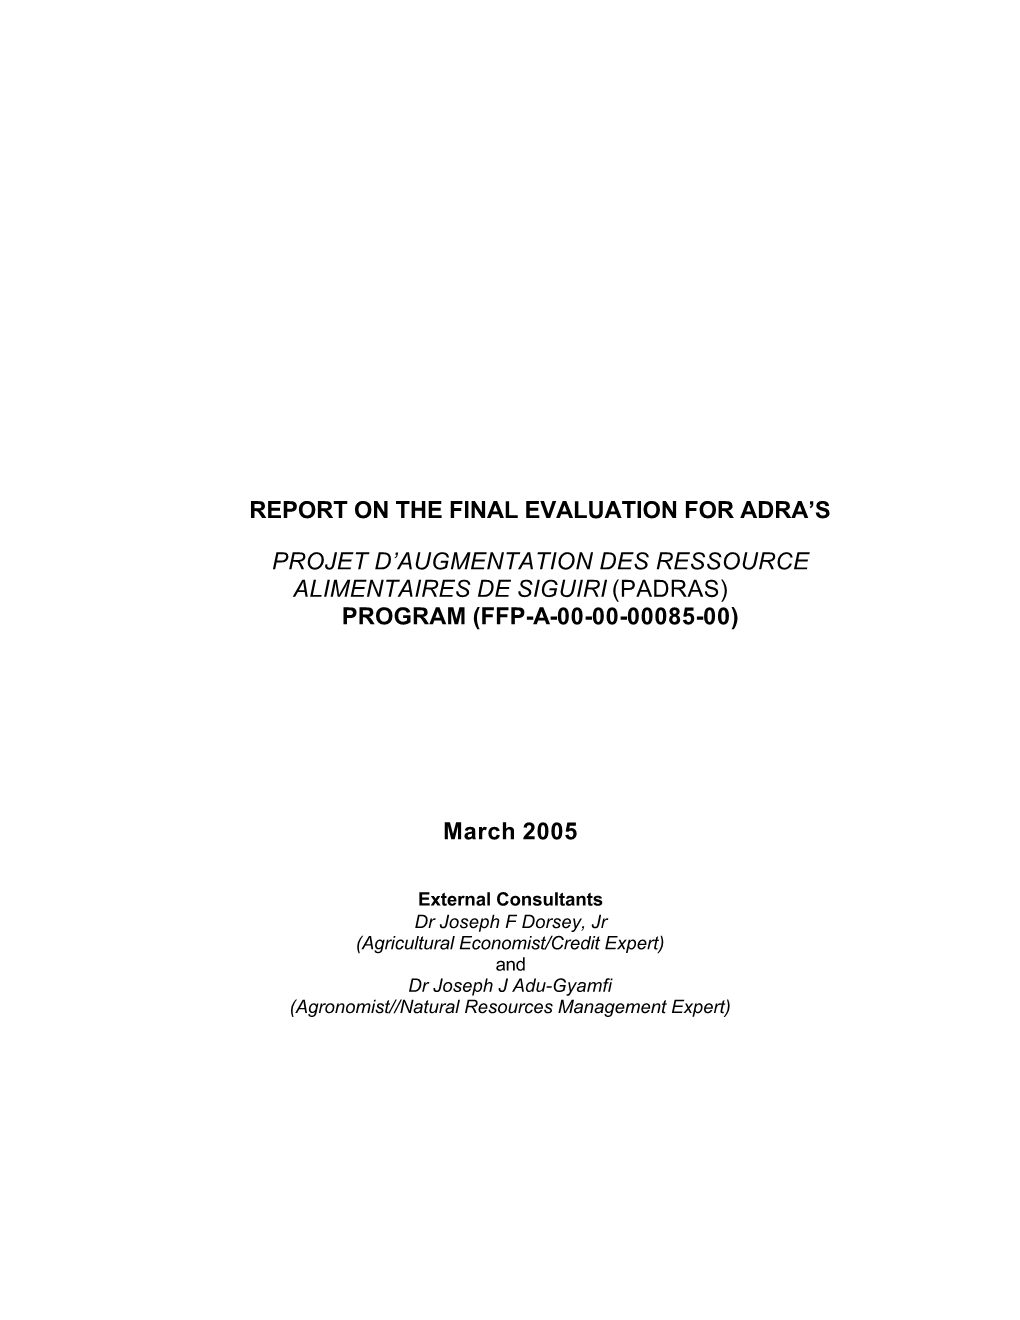 Report on the Final Evaluation for Adra's